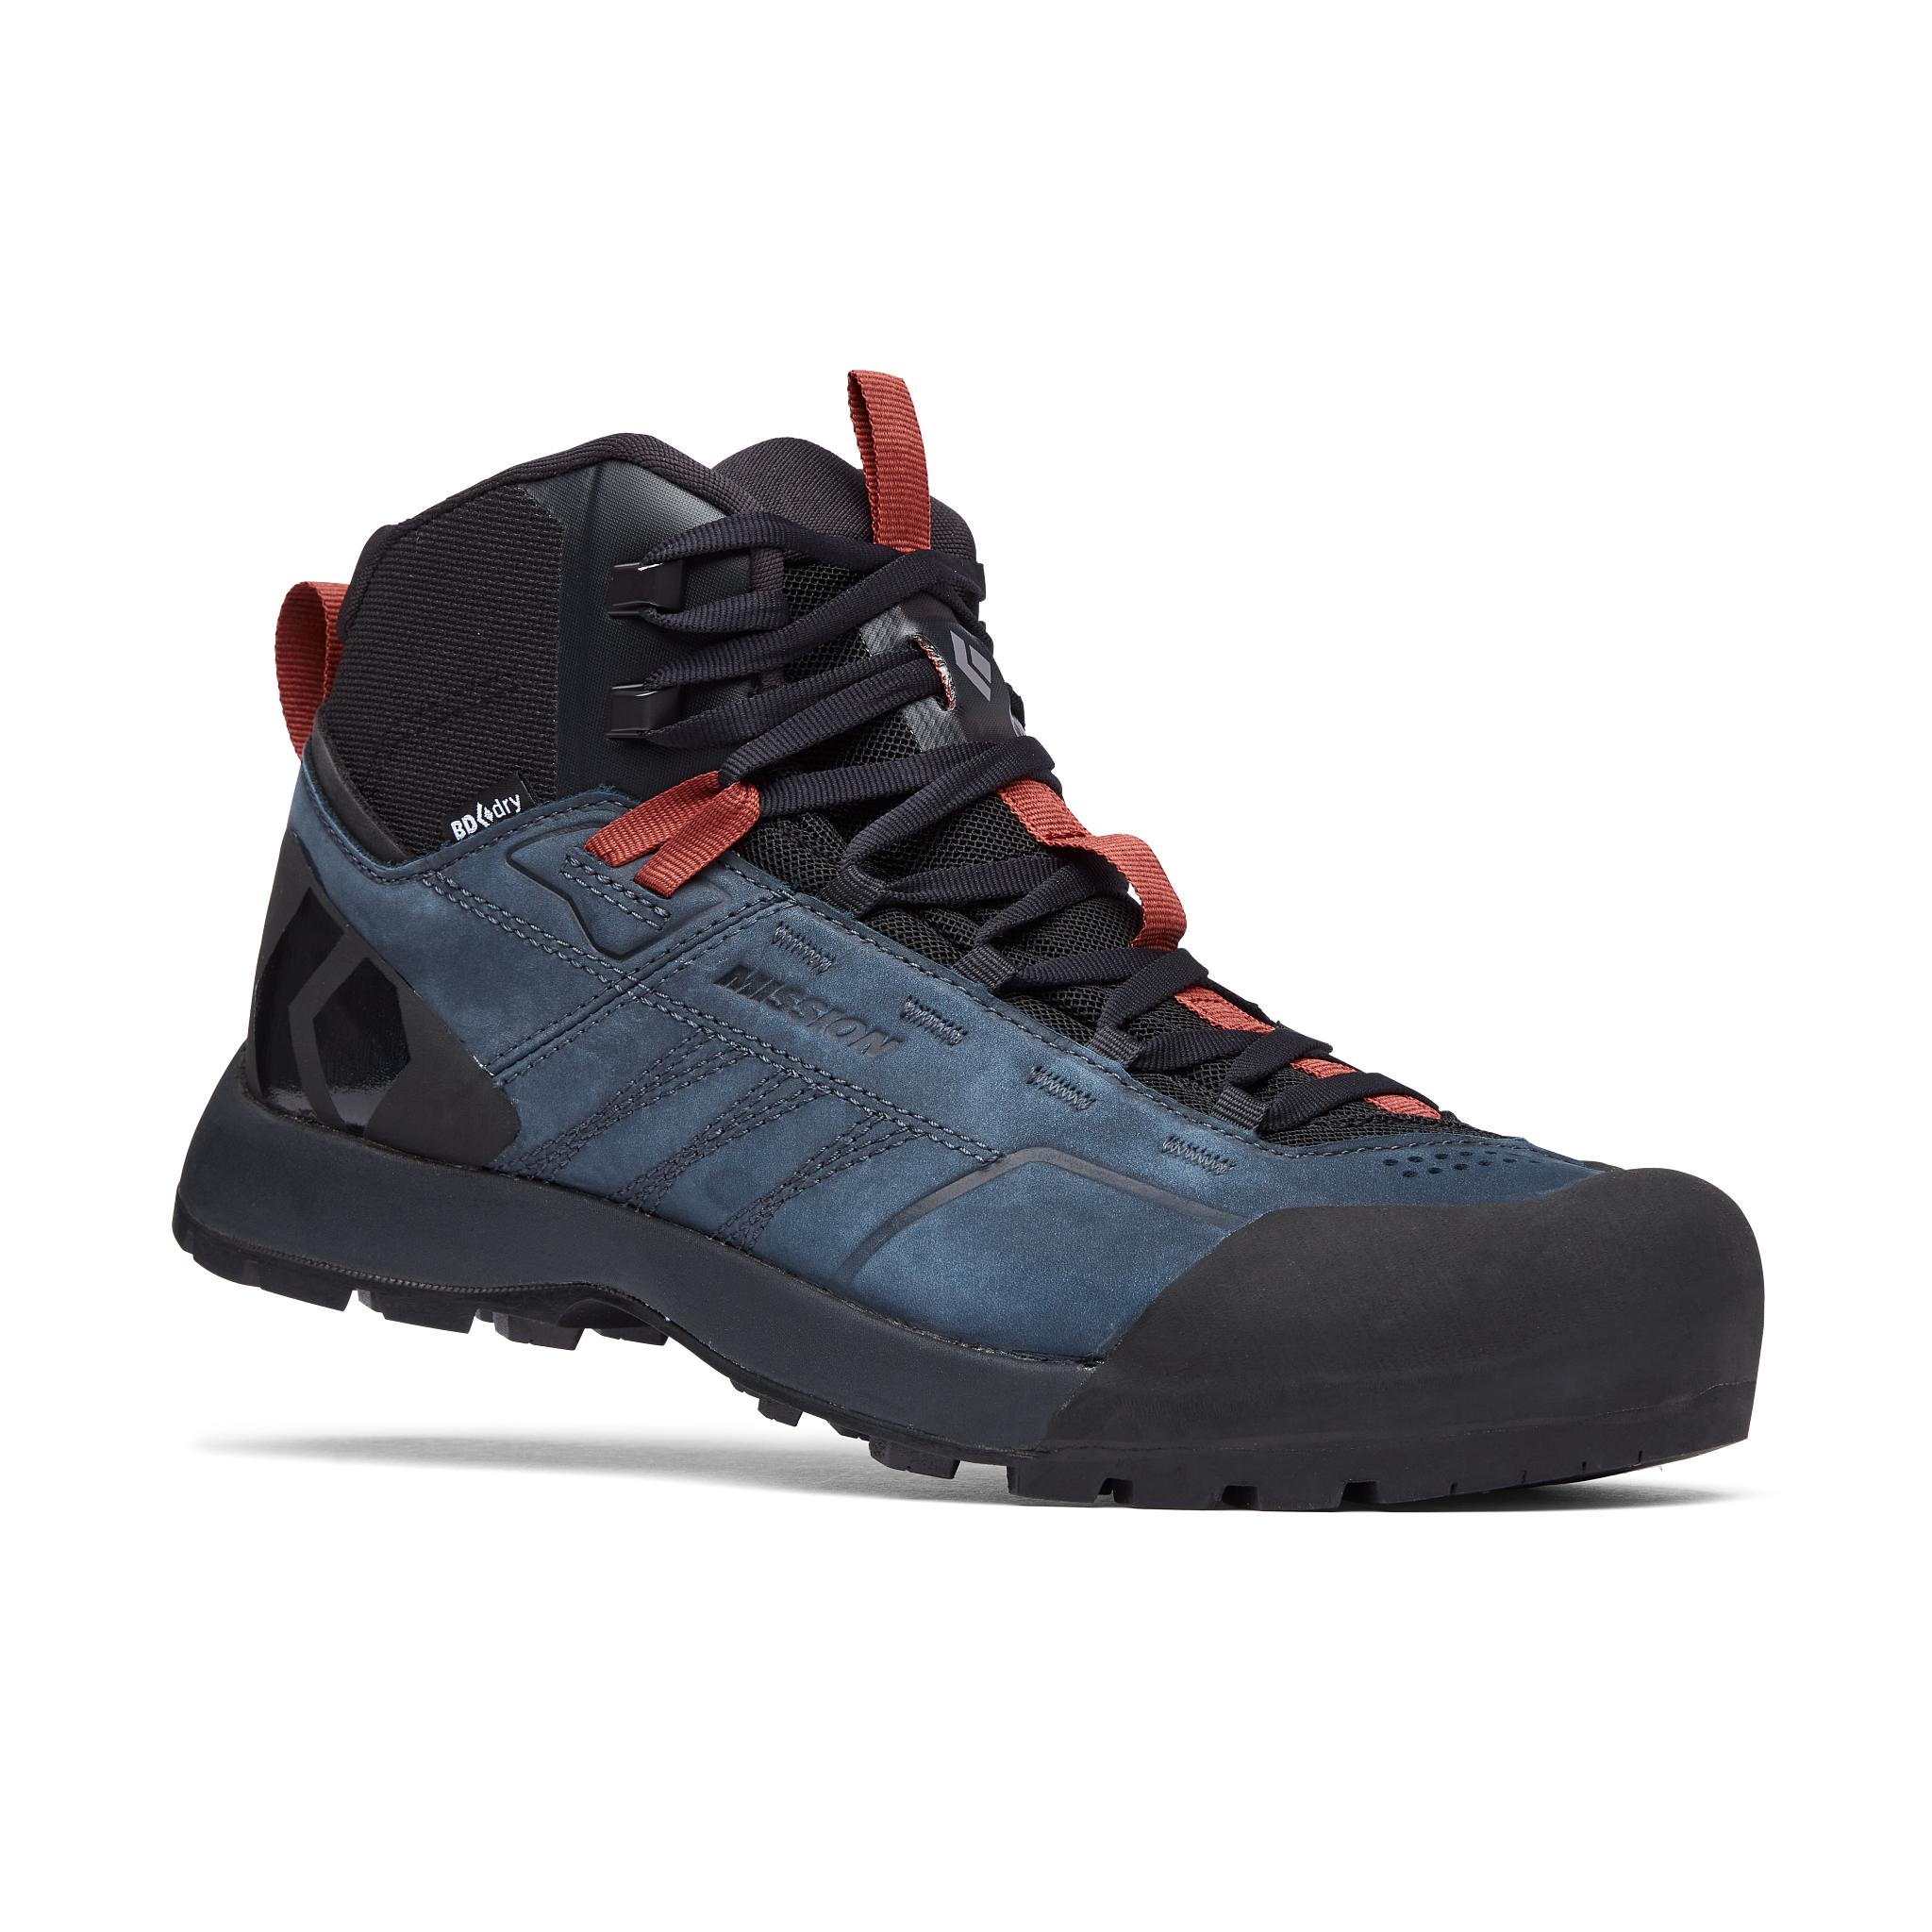 Black Diamond Equipment Men's Mission Leather Mid Waterproof Approach Shoes 2nds US 11 Eclipse/Red Rock